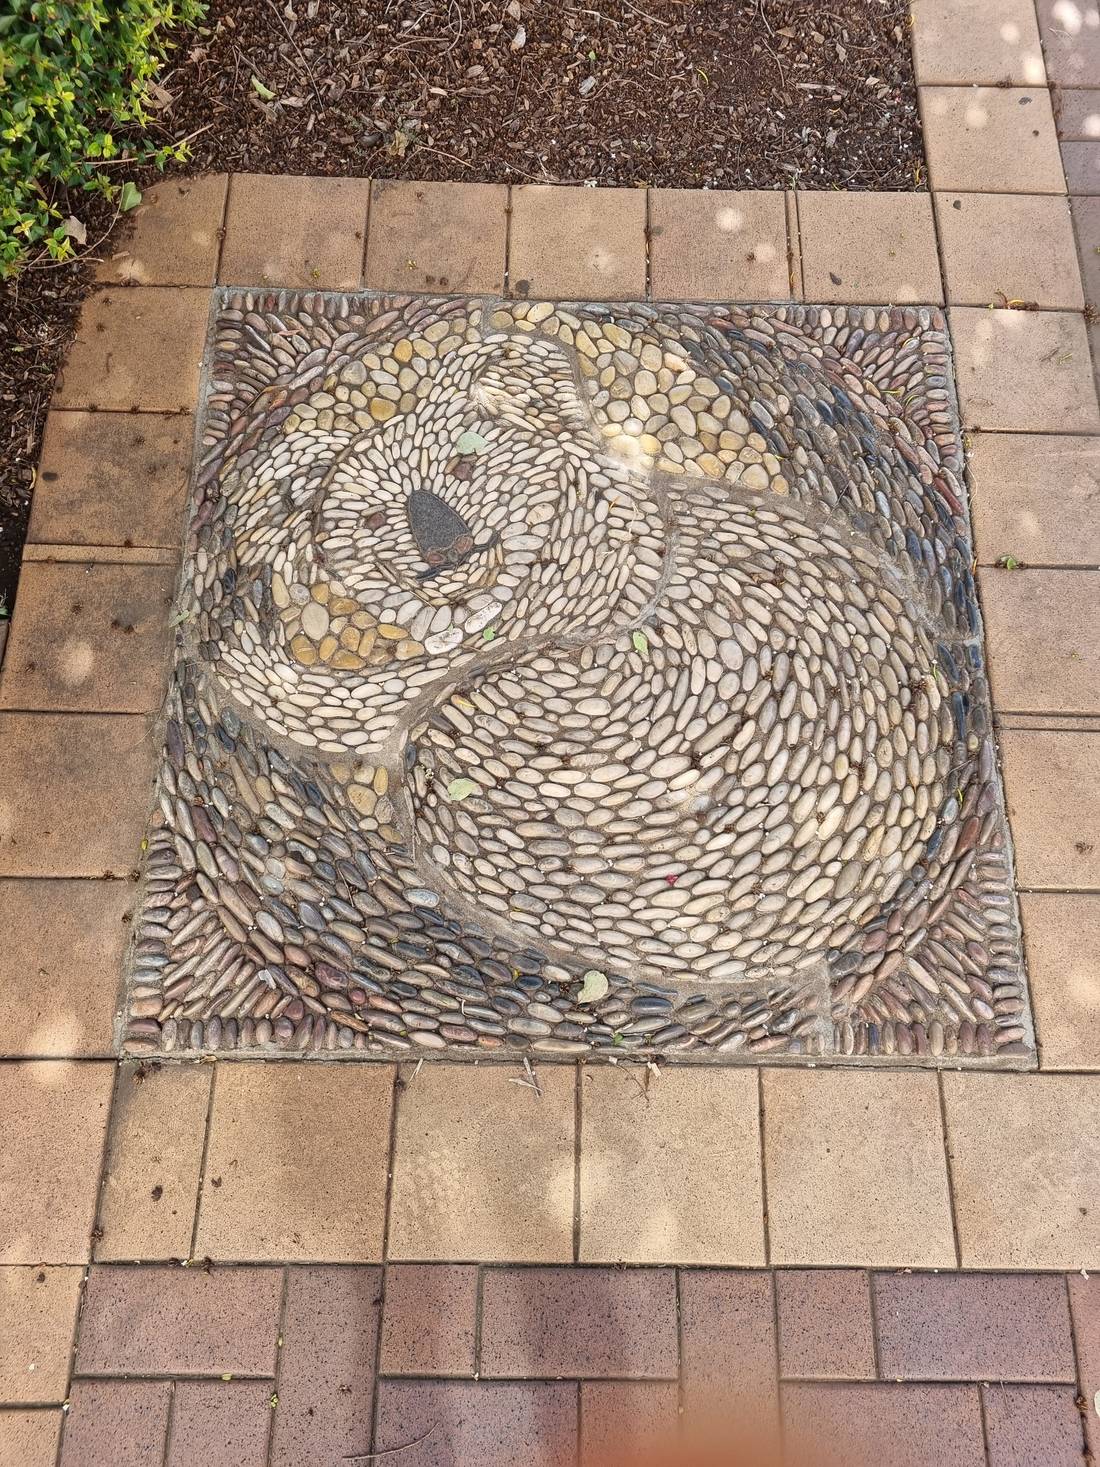 There were a few cool stone mosaic things near the street corners on the main road through town. This one was the best in my opinion. It’s a koala! Can you see it?